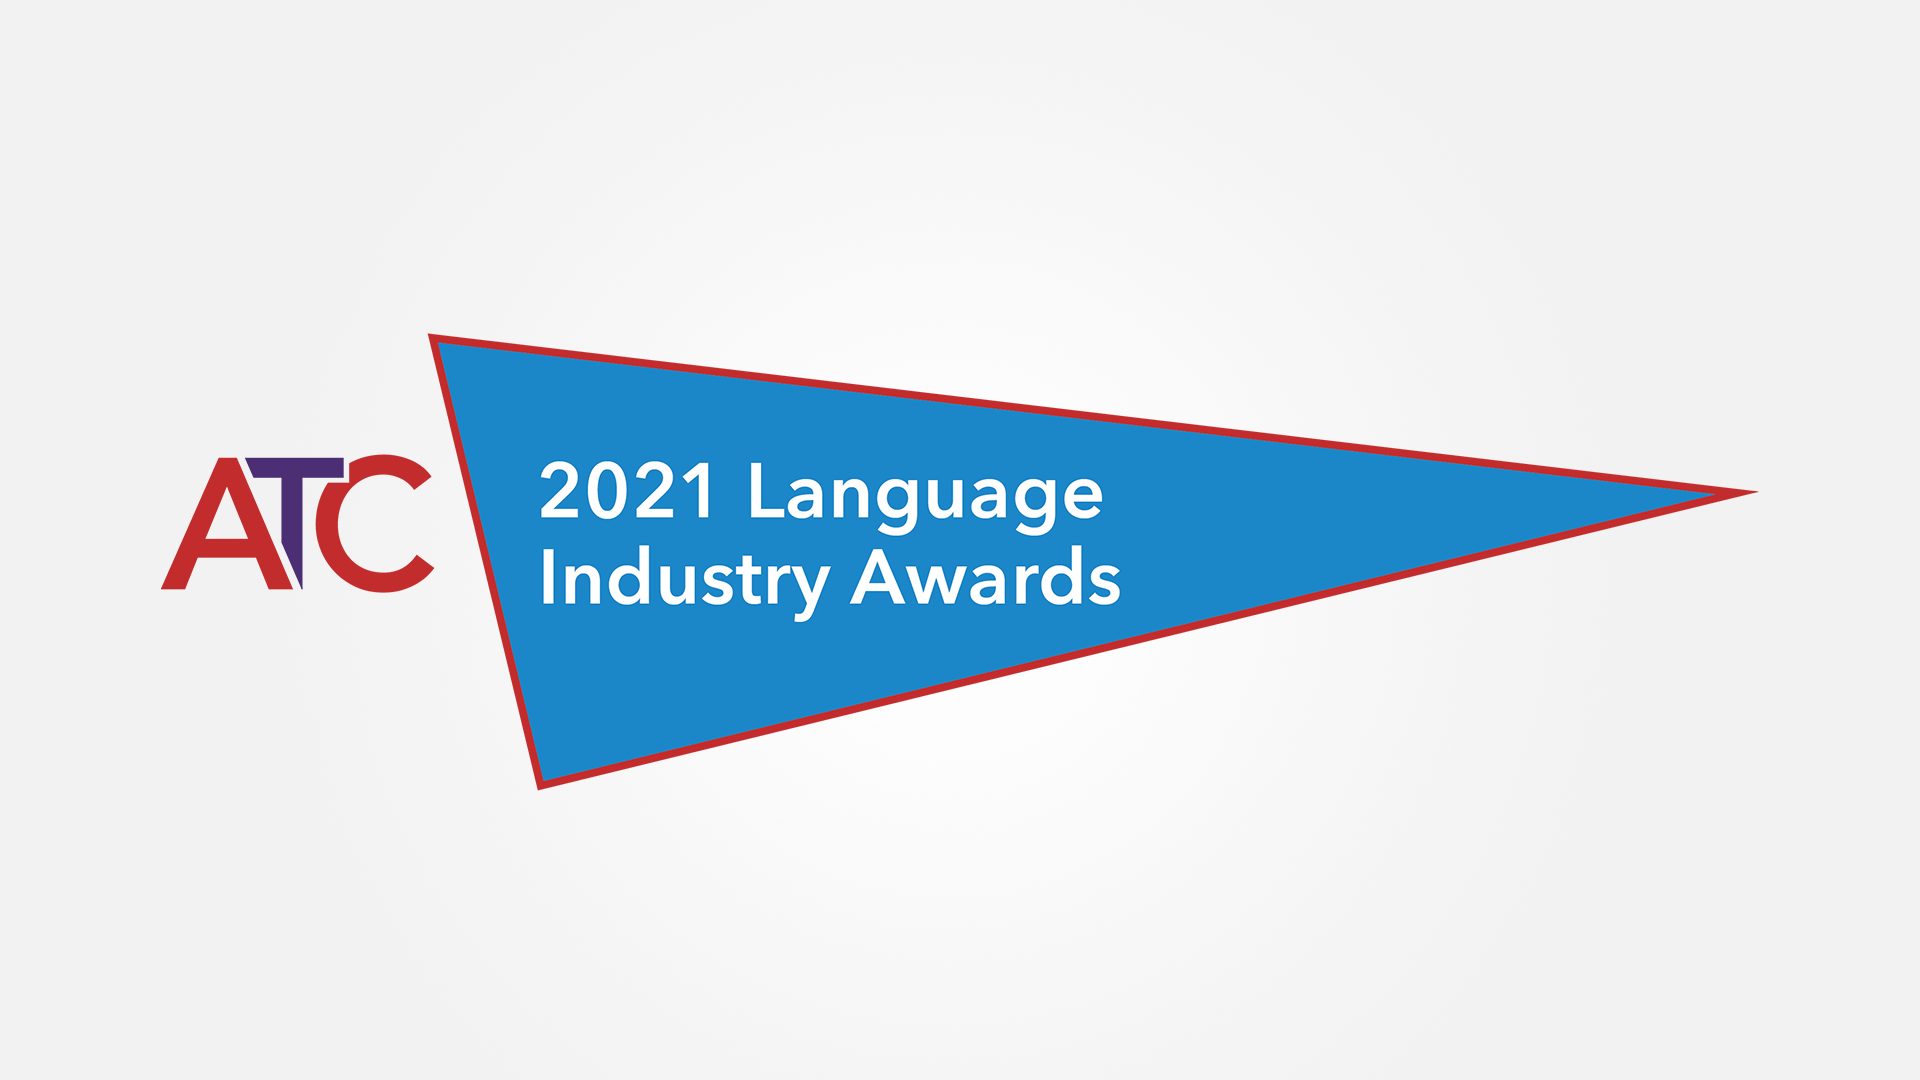 ATC Language Industry Awards 2021 Open for Nominations!